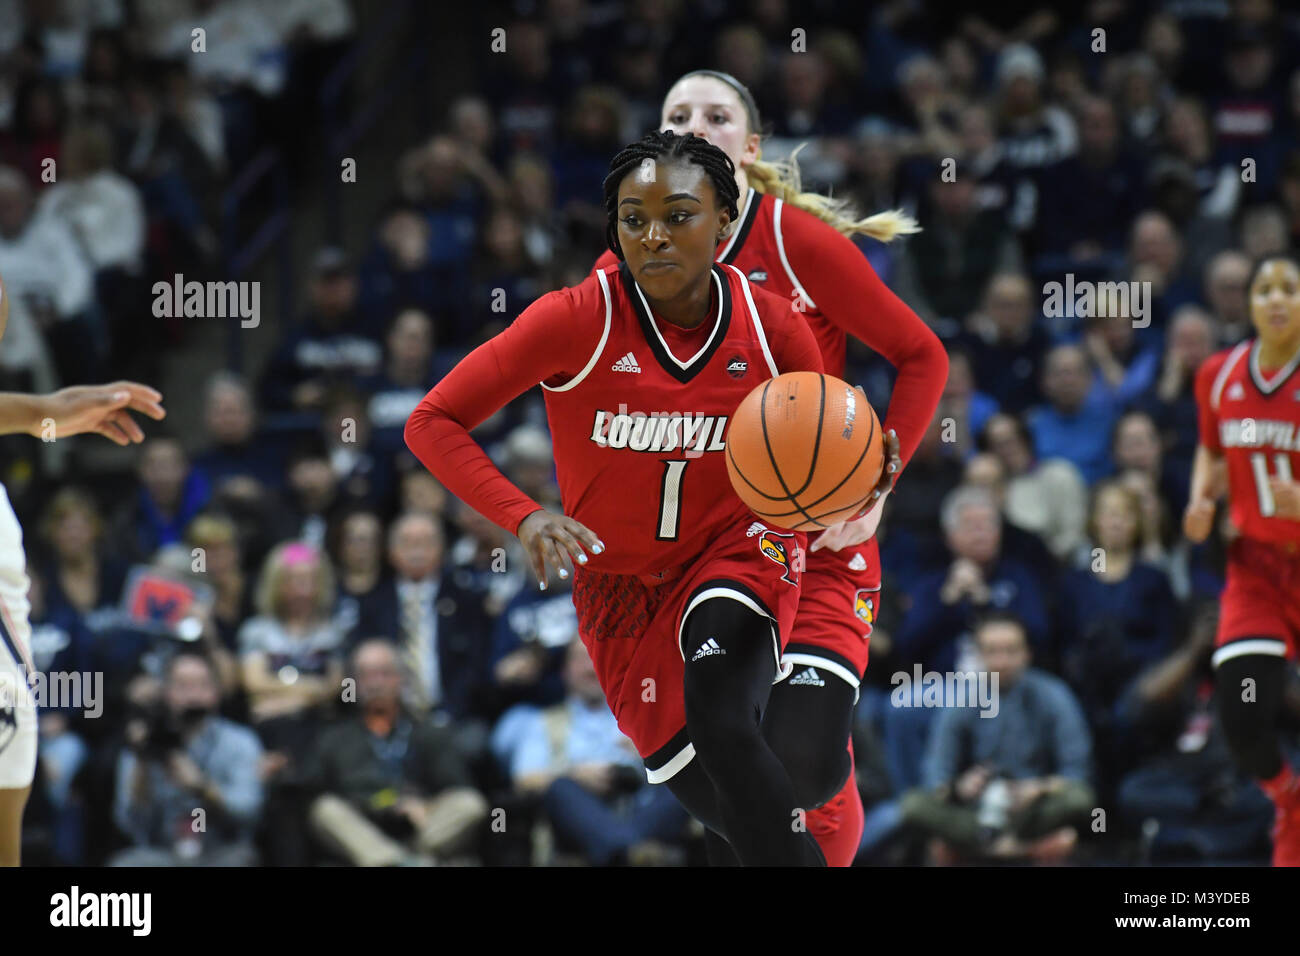 Stores, Connecticut, USA. 12th Feb, 2018. Dana Evans (1) of the Louisville Cardinals brings the ball up the floor during a game against Uconn Huskies at Gampel Pavilion in Stores, Connecticut. Gregory Vasil/Cal Sport Media/Alamy Live News Stock Photo